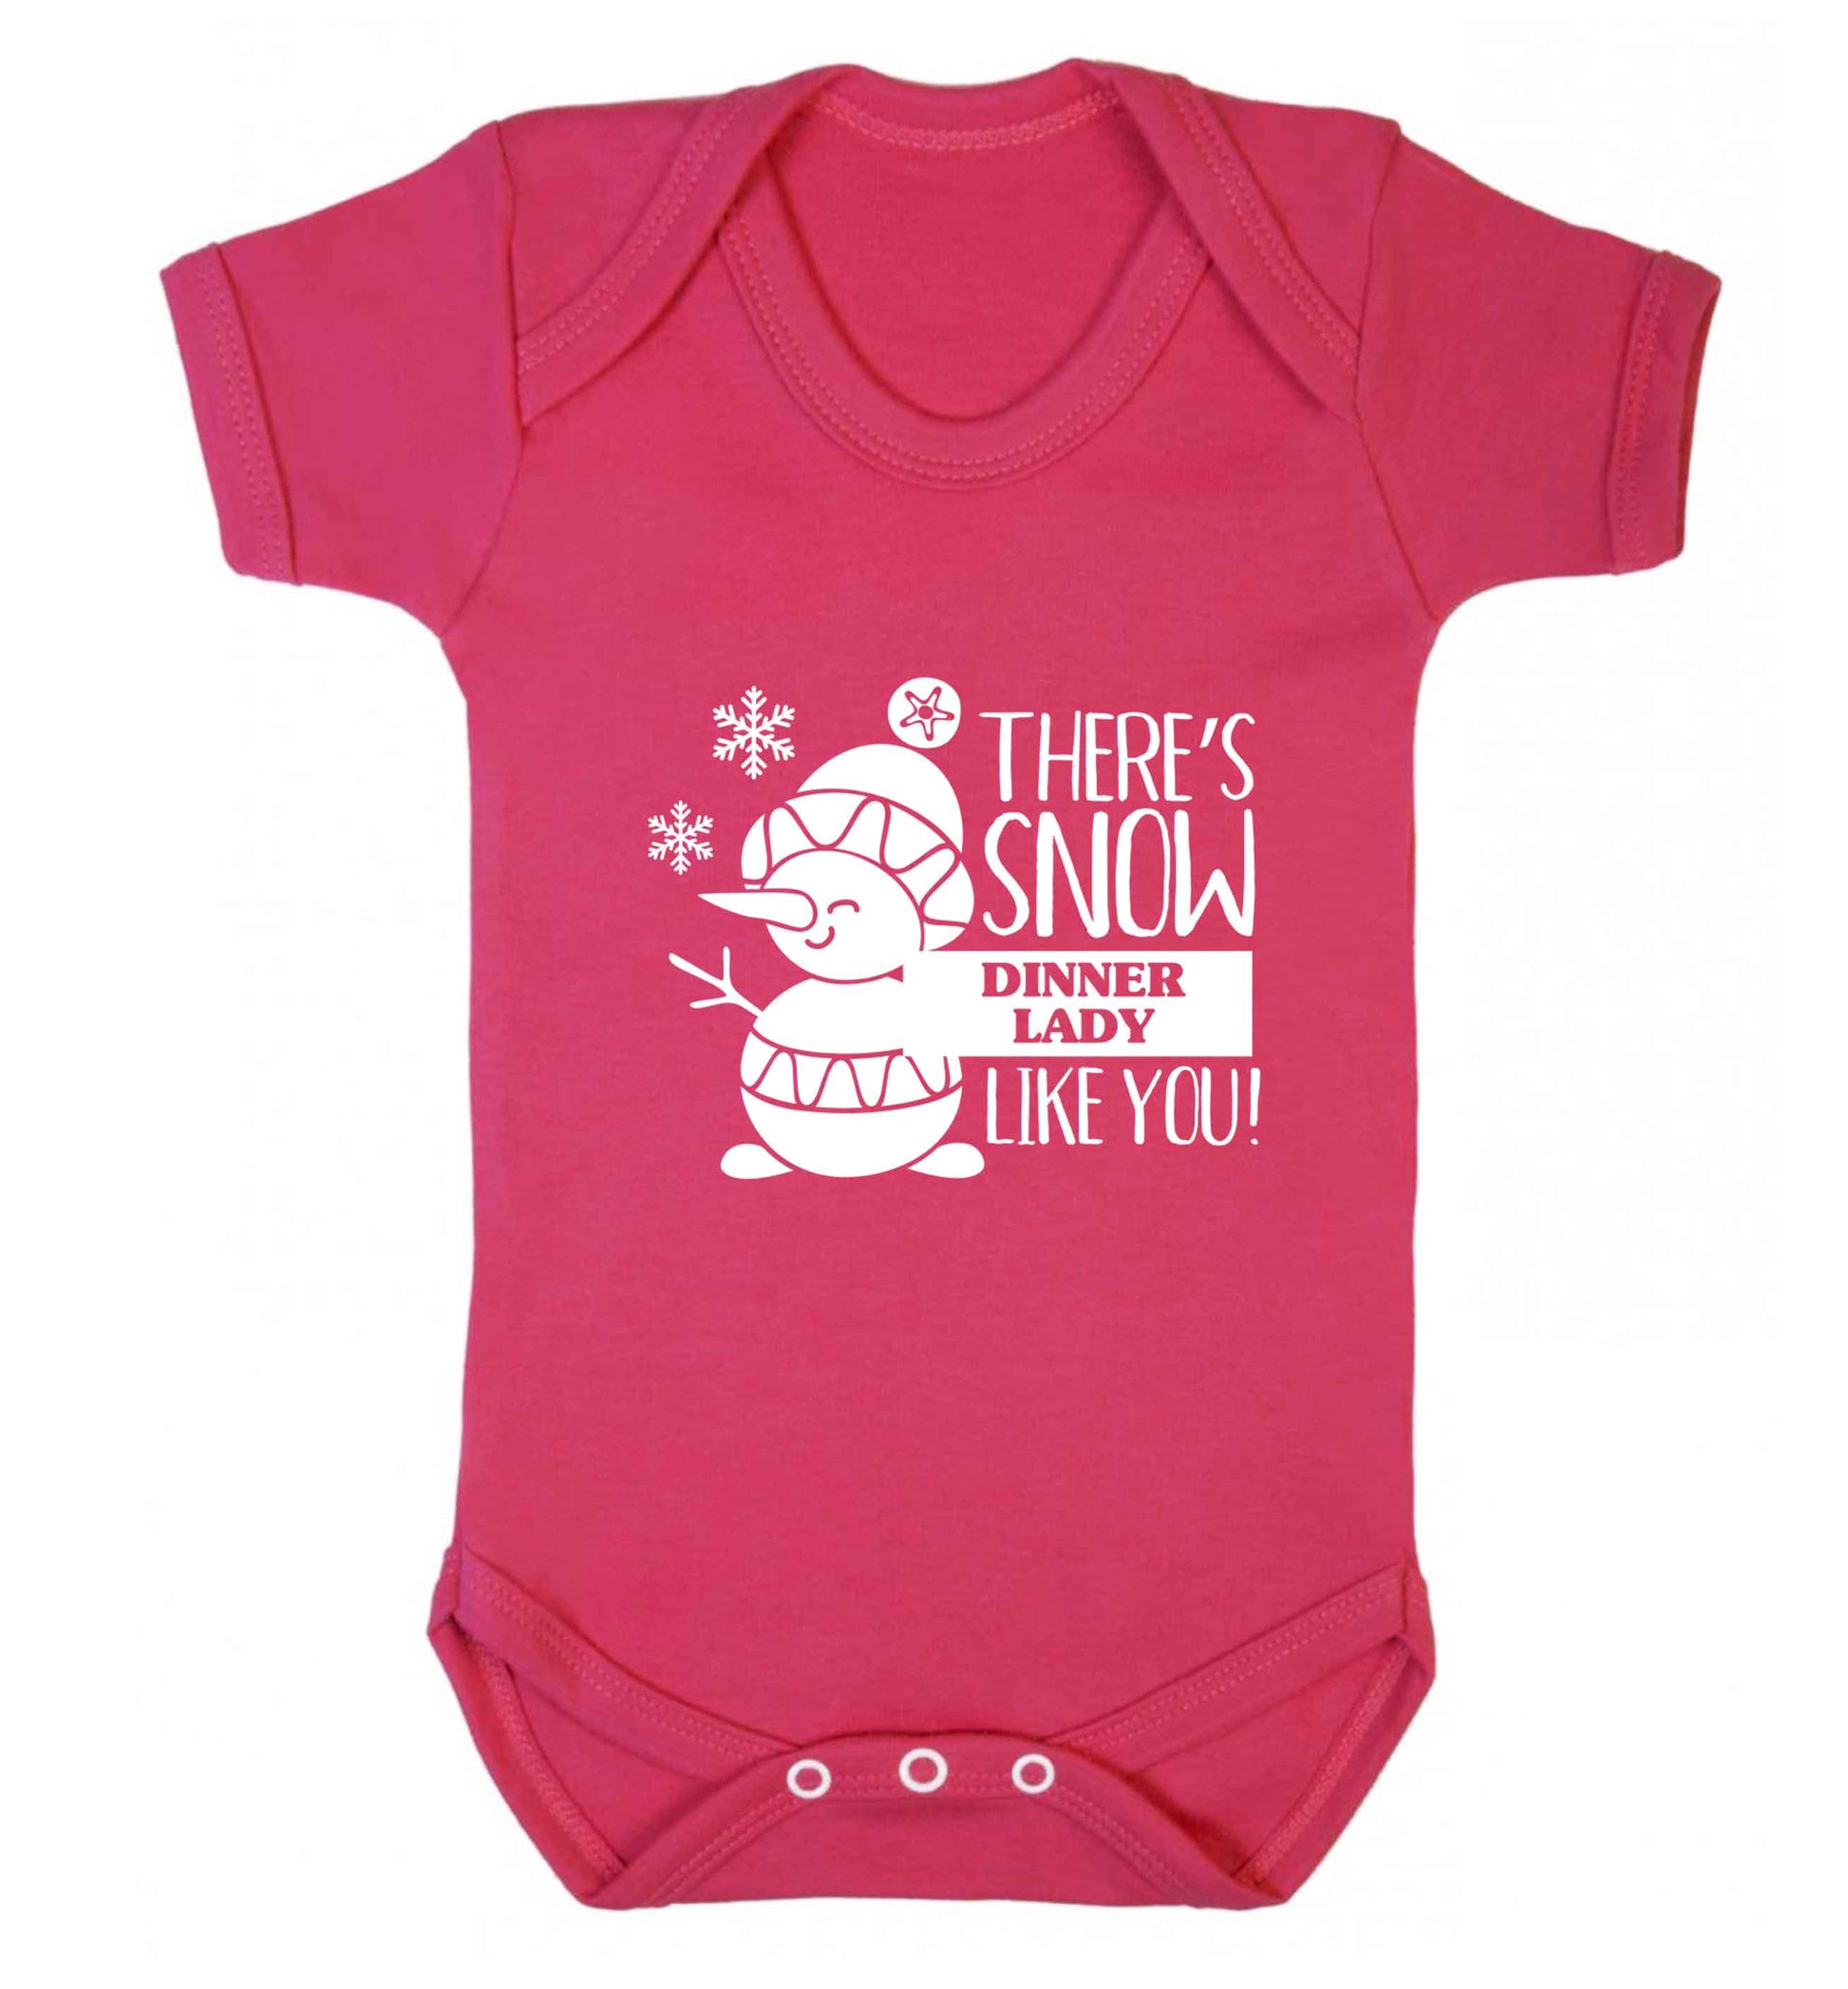 There's snow dinner lady like you baby vest dark pink 18-24 months